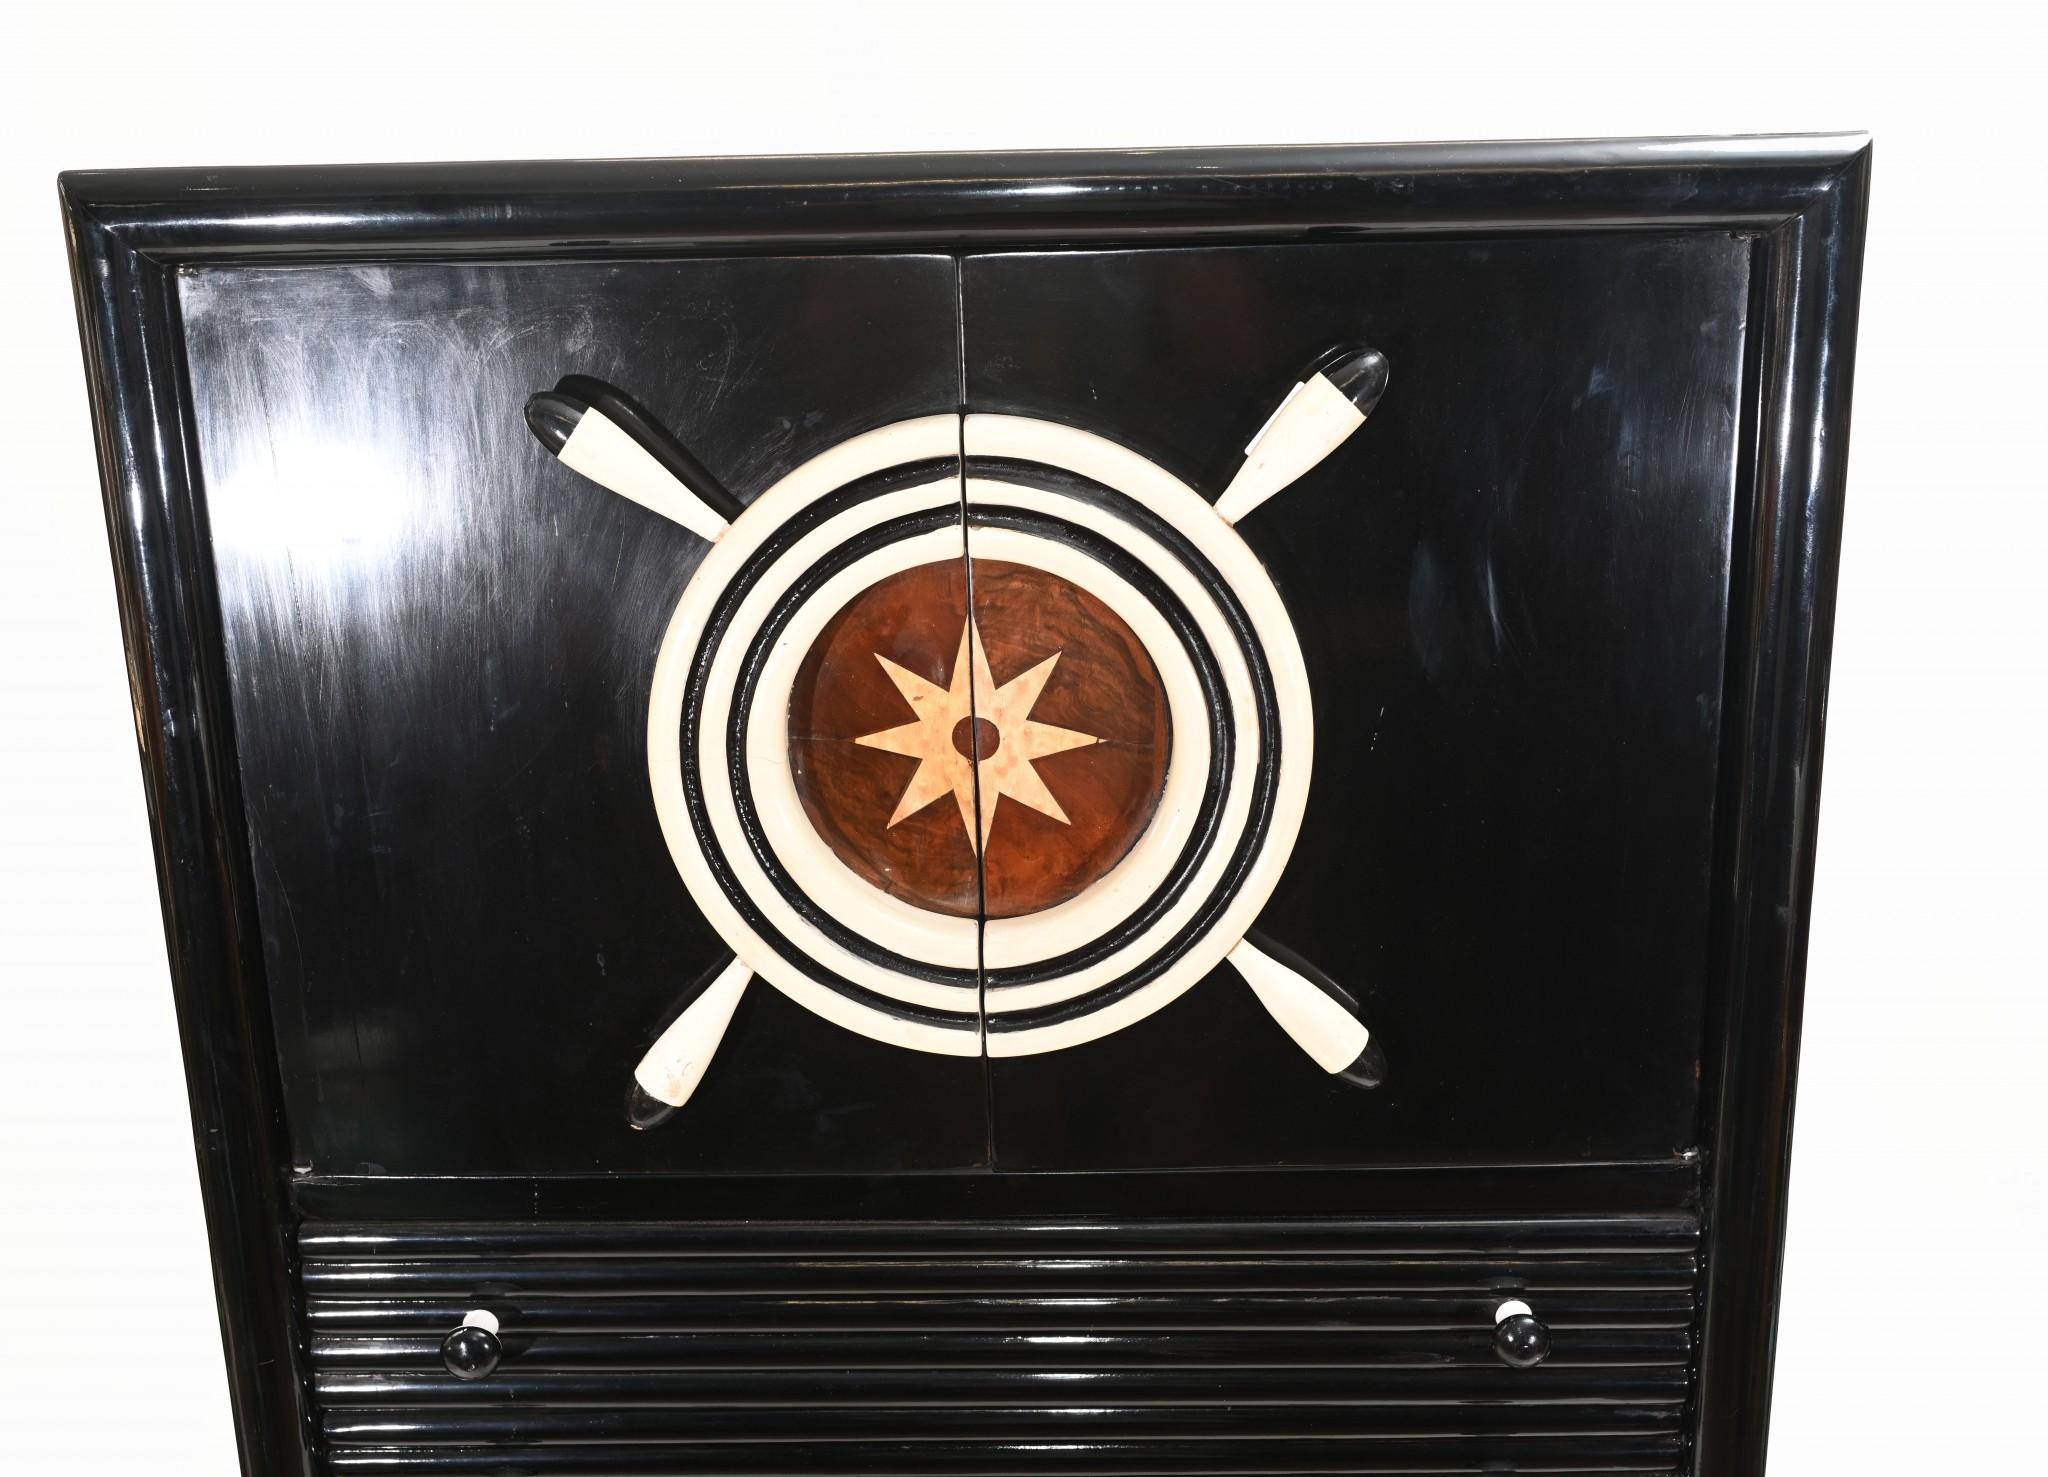 Wonderful Art Deco style drinks cabinet with a lacquer finish
Love the nautical theme to the design with ships stearing wheel cabinet door handles
Black trim offset by lighter shade of cabinet
Very unique interiors look, great for beach or